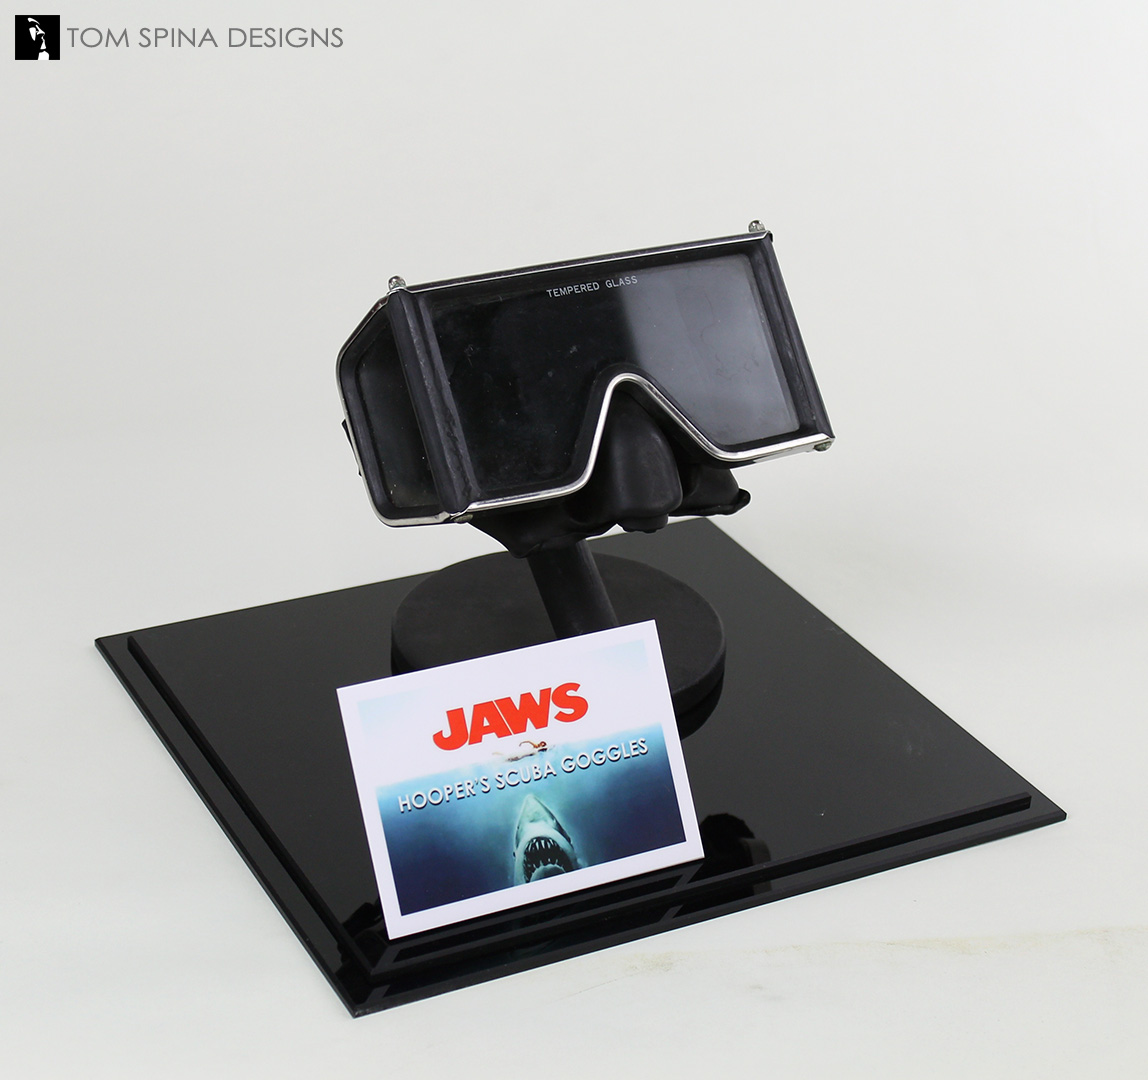 Acrylic Display Case for Screen Used Jaws Prop - Tom Spina Designs